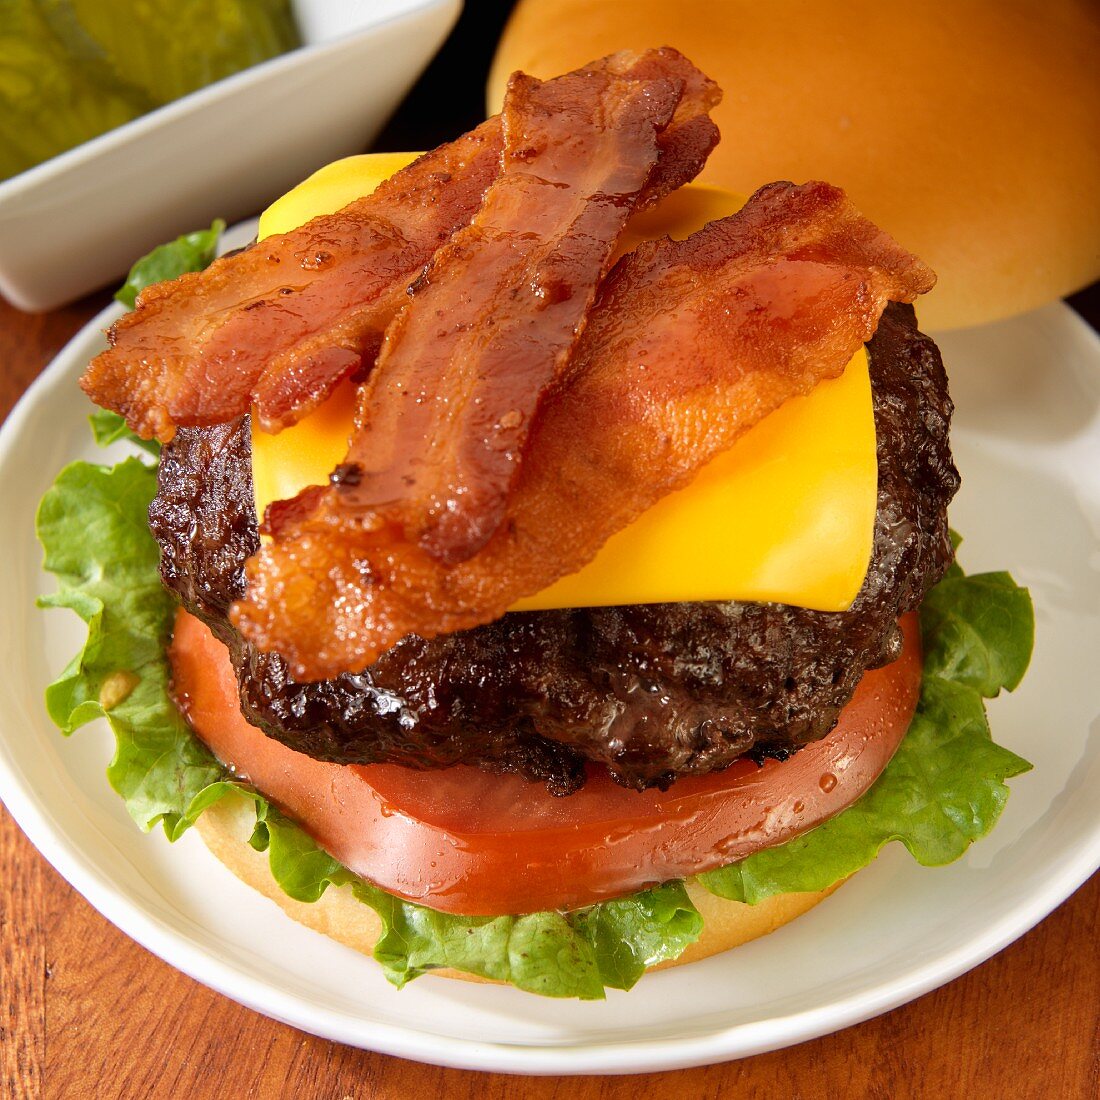 Cheeseburger with bacon, tomato and lettuce